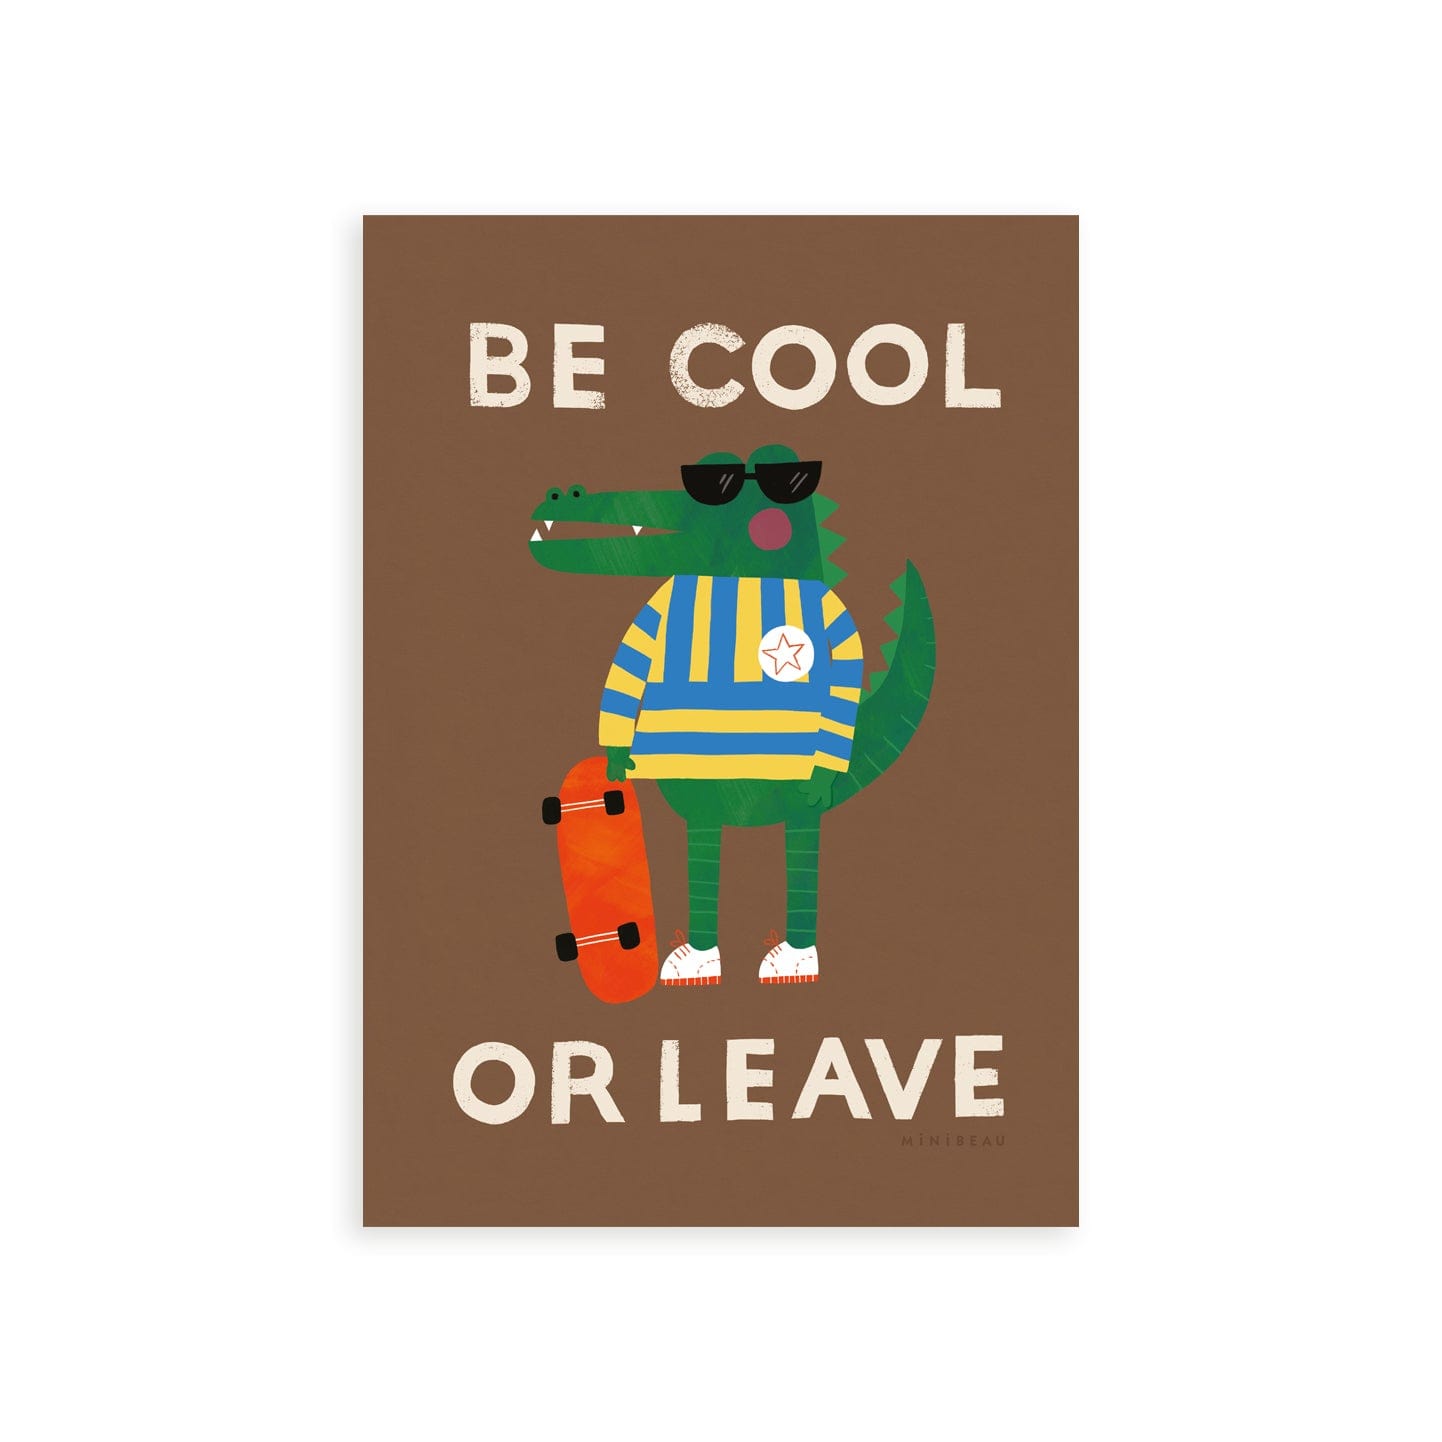 Our be cool or leave art print show a crocodile in a yellow and blue striped jumper and sunglasses, standing on his hind legs holding a skateboard, with the words be cool or leave in an off-white on a brown background.